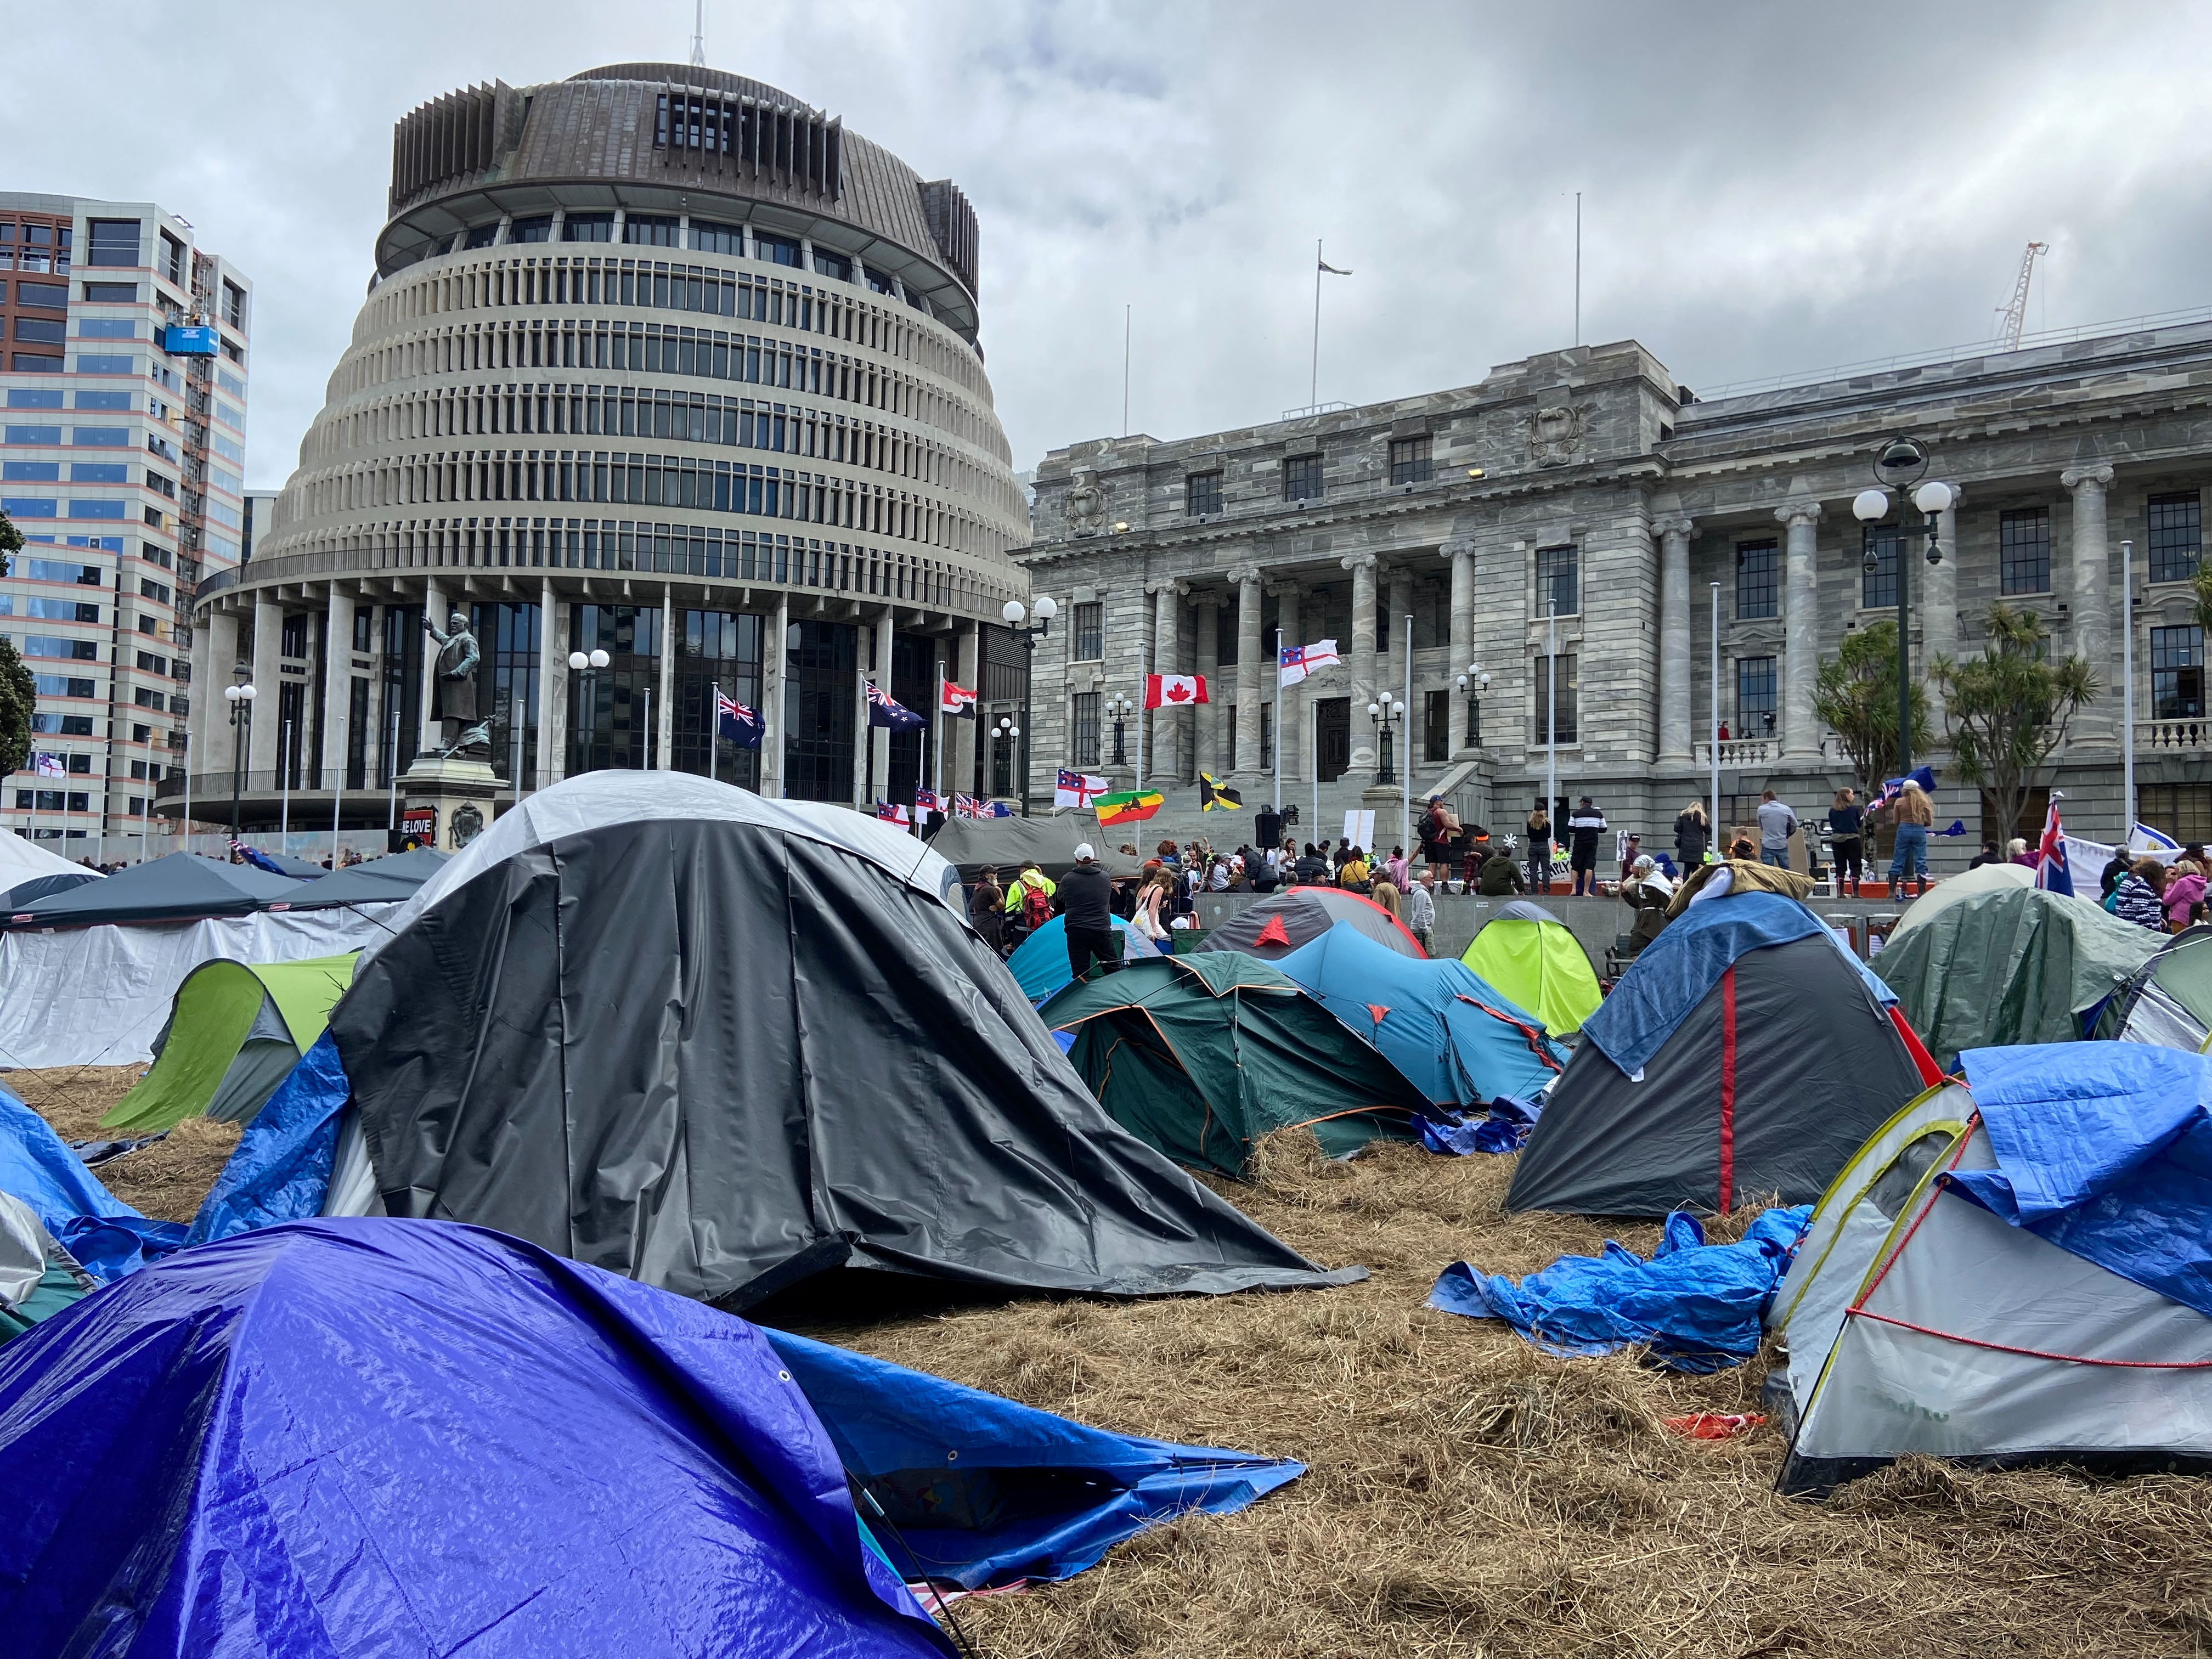 New Zealand’s Ardern labels anti-vaccine protests ‘imported’ as crowds defy calls to leave